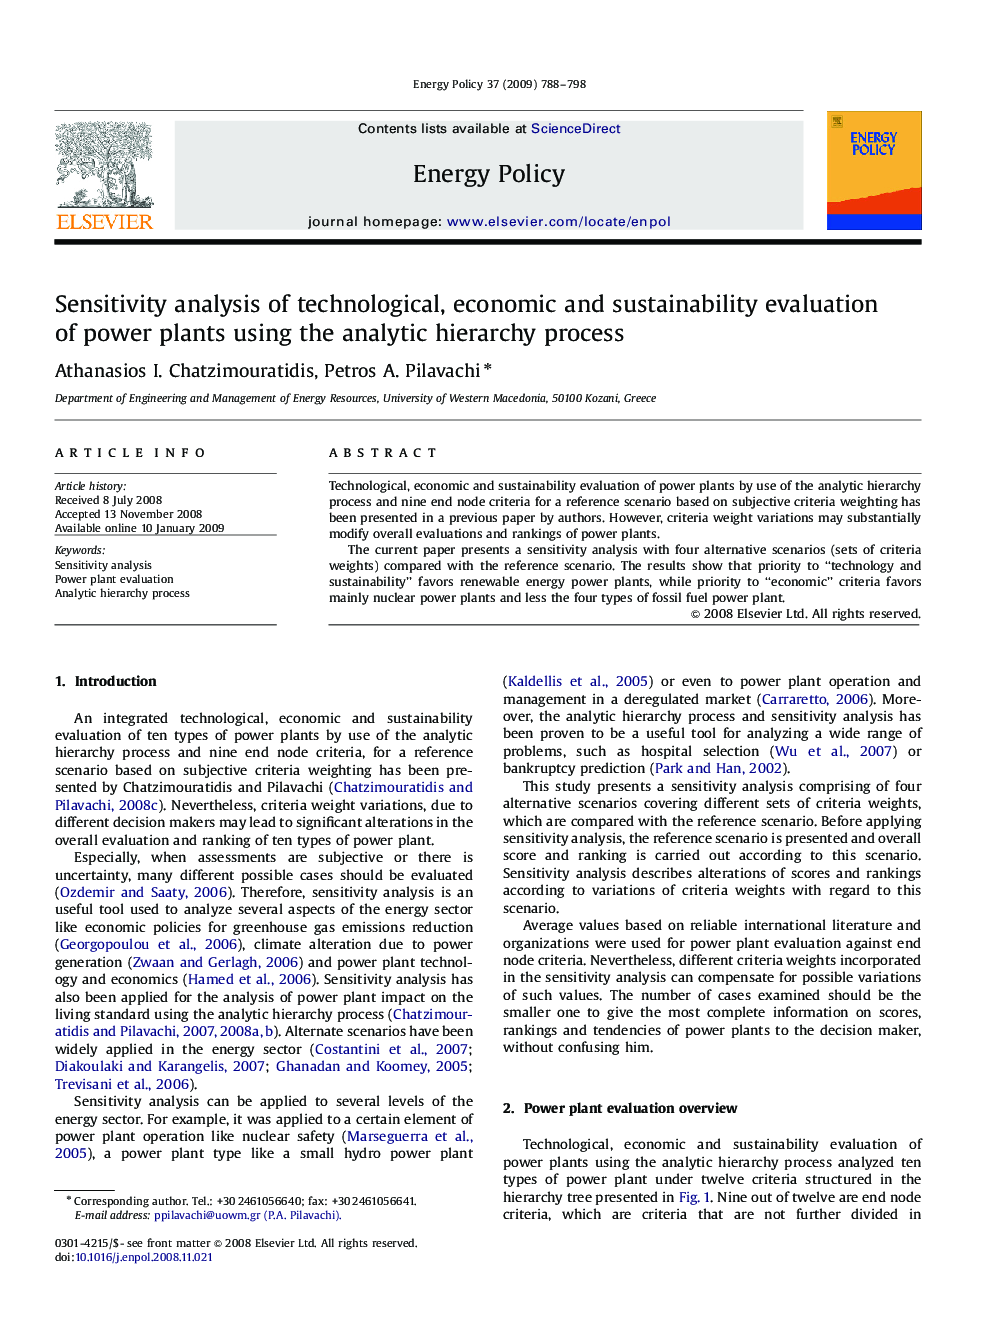 Sensitivity analysis of technological, economic and sustainability evaluation of power plants using the analytic hierarchy process